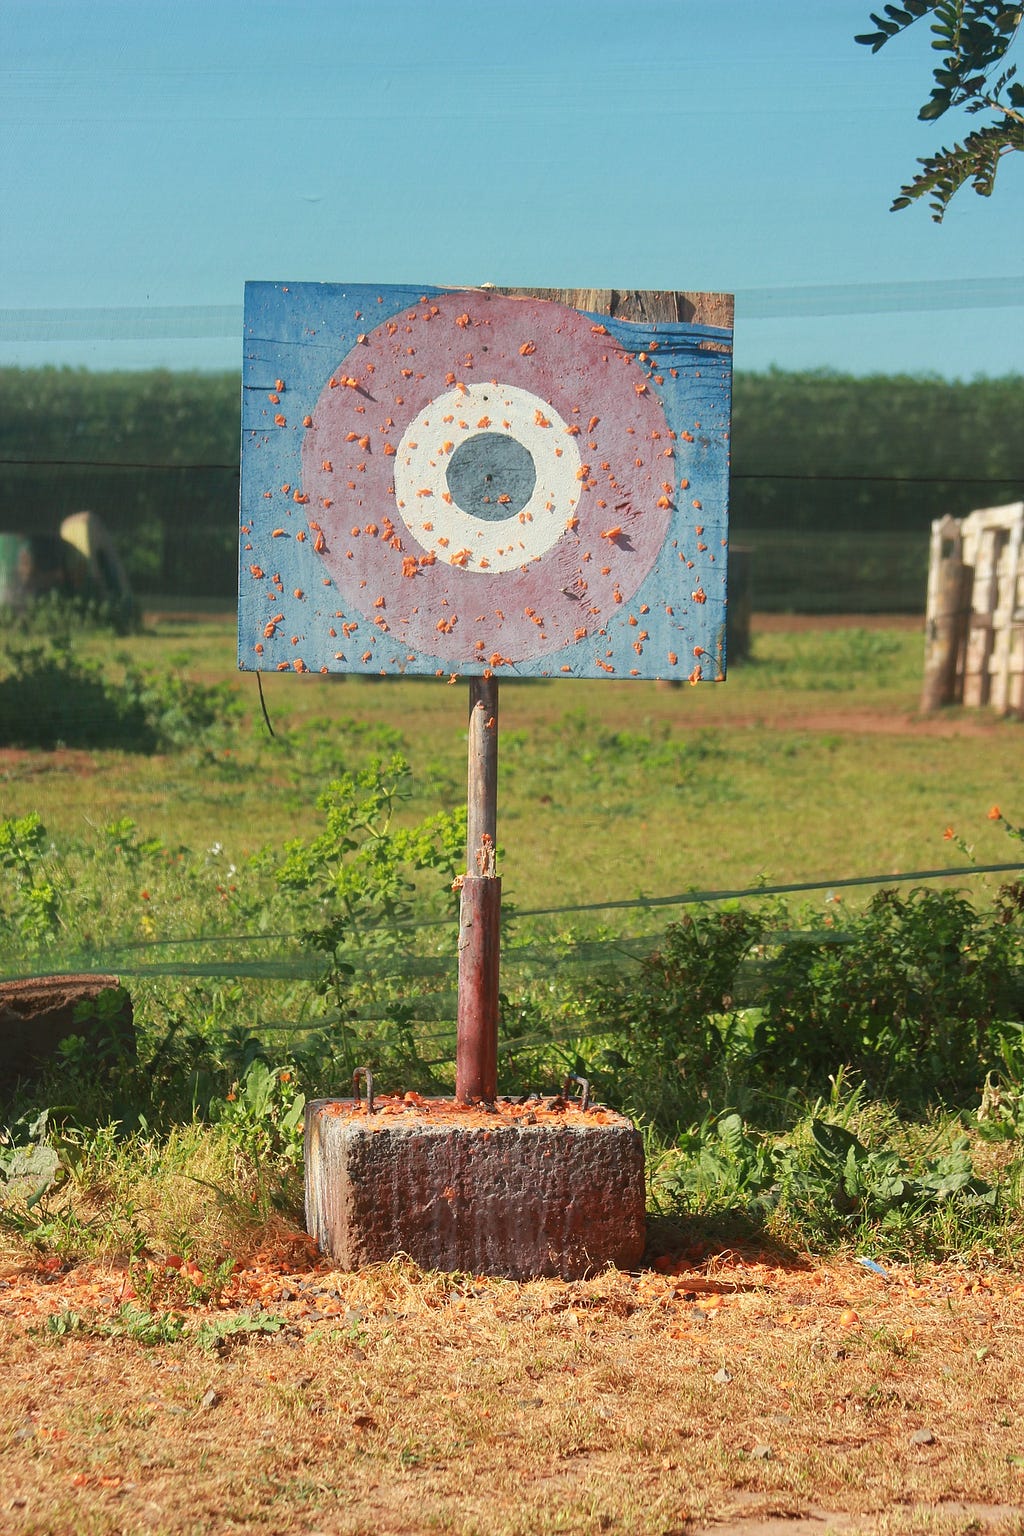 A target (representing an objective) standing in a field